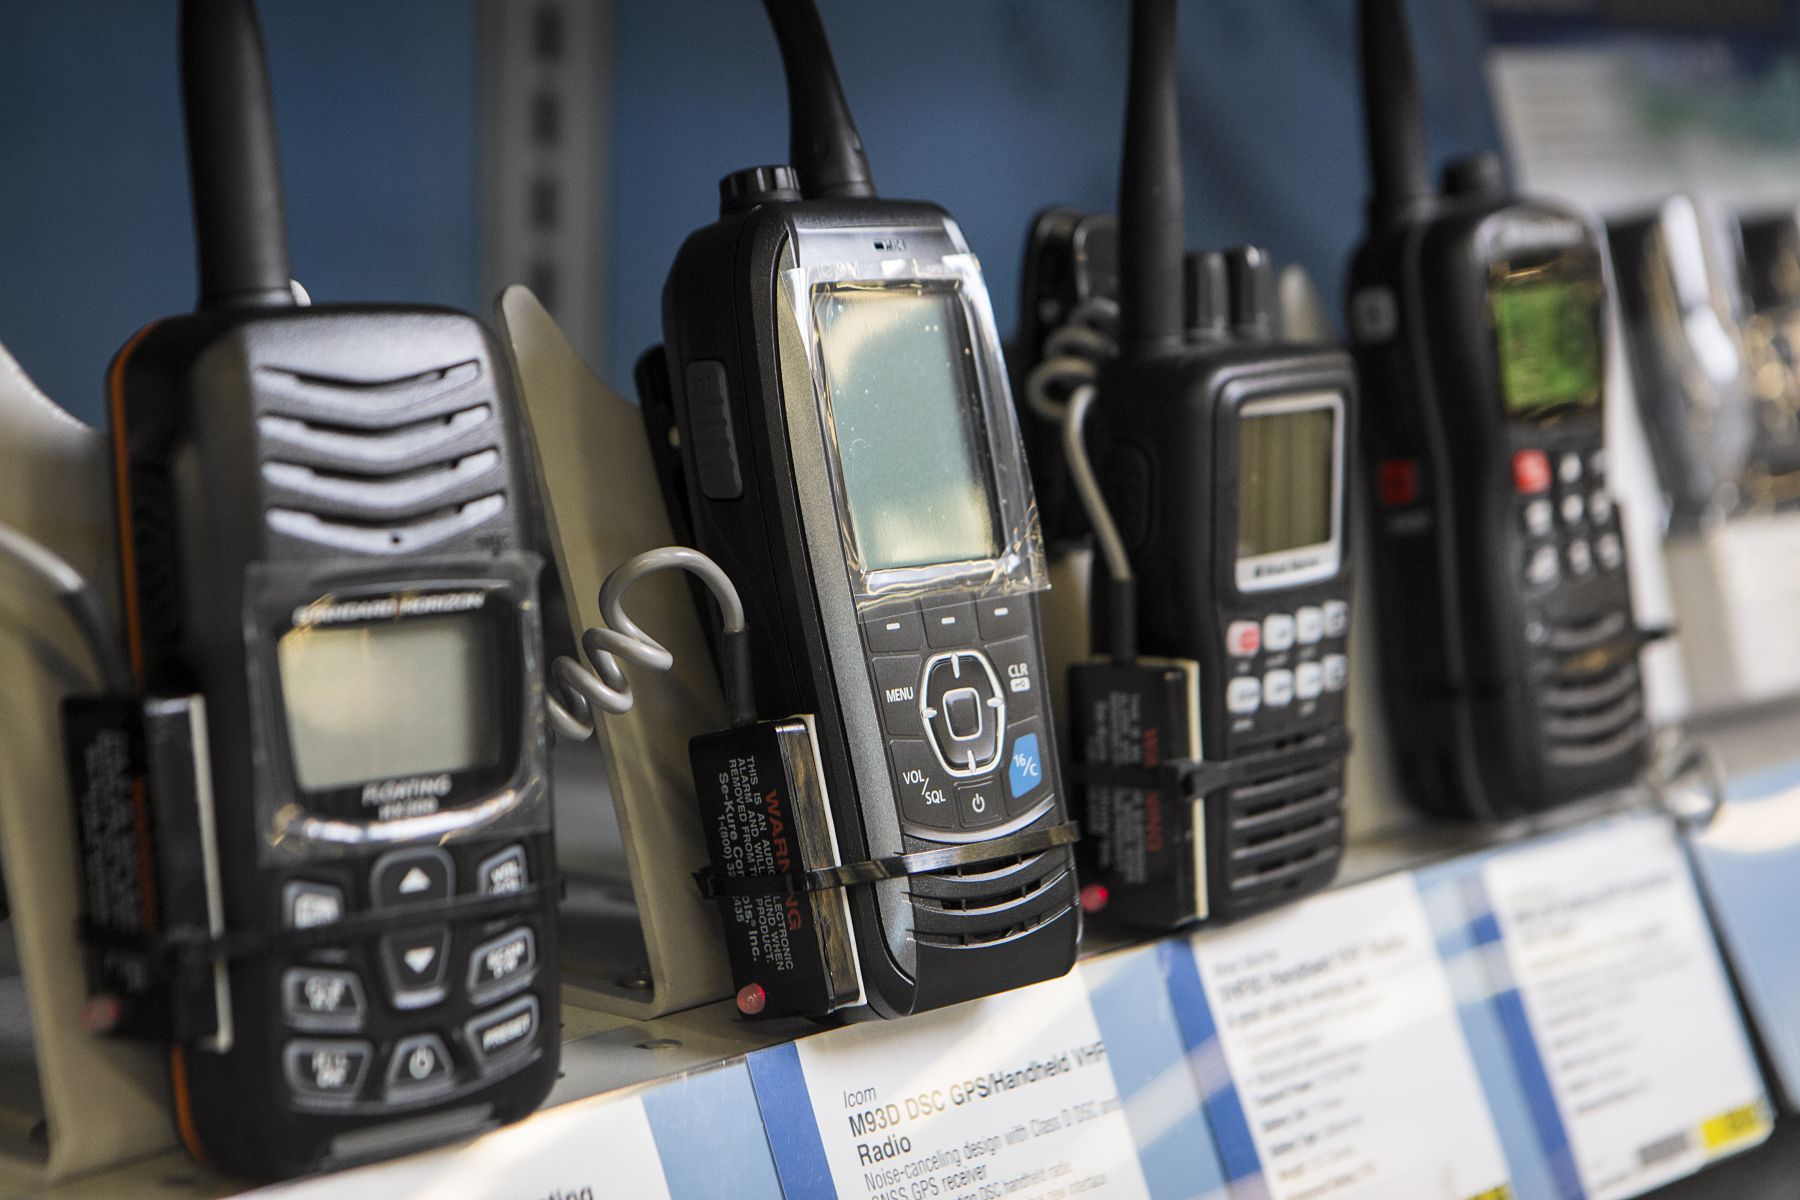 Handheld VHF radios on display at a retail outlet.